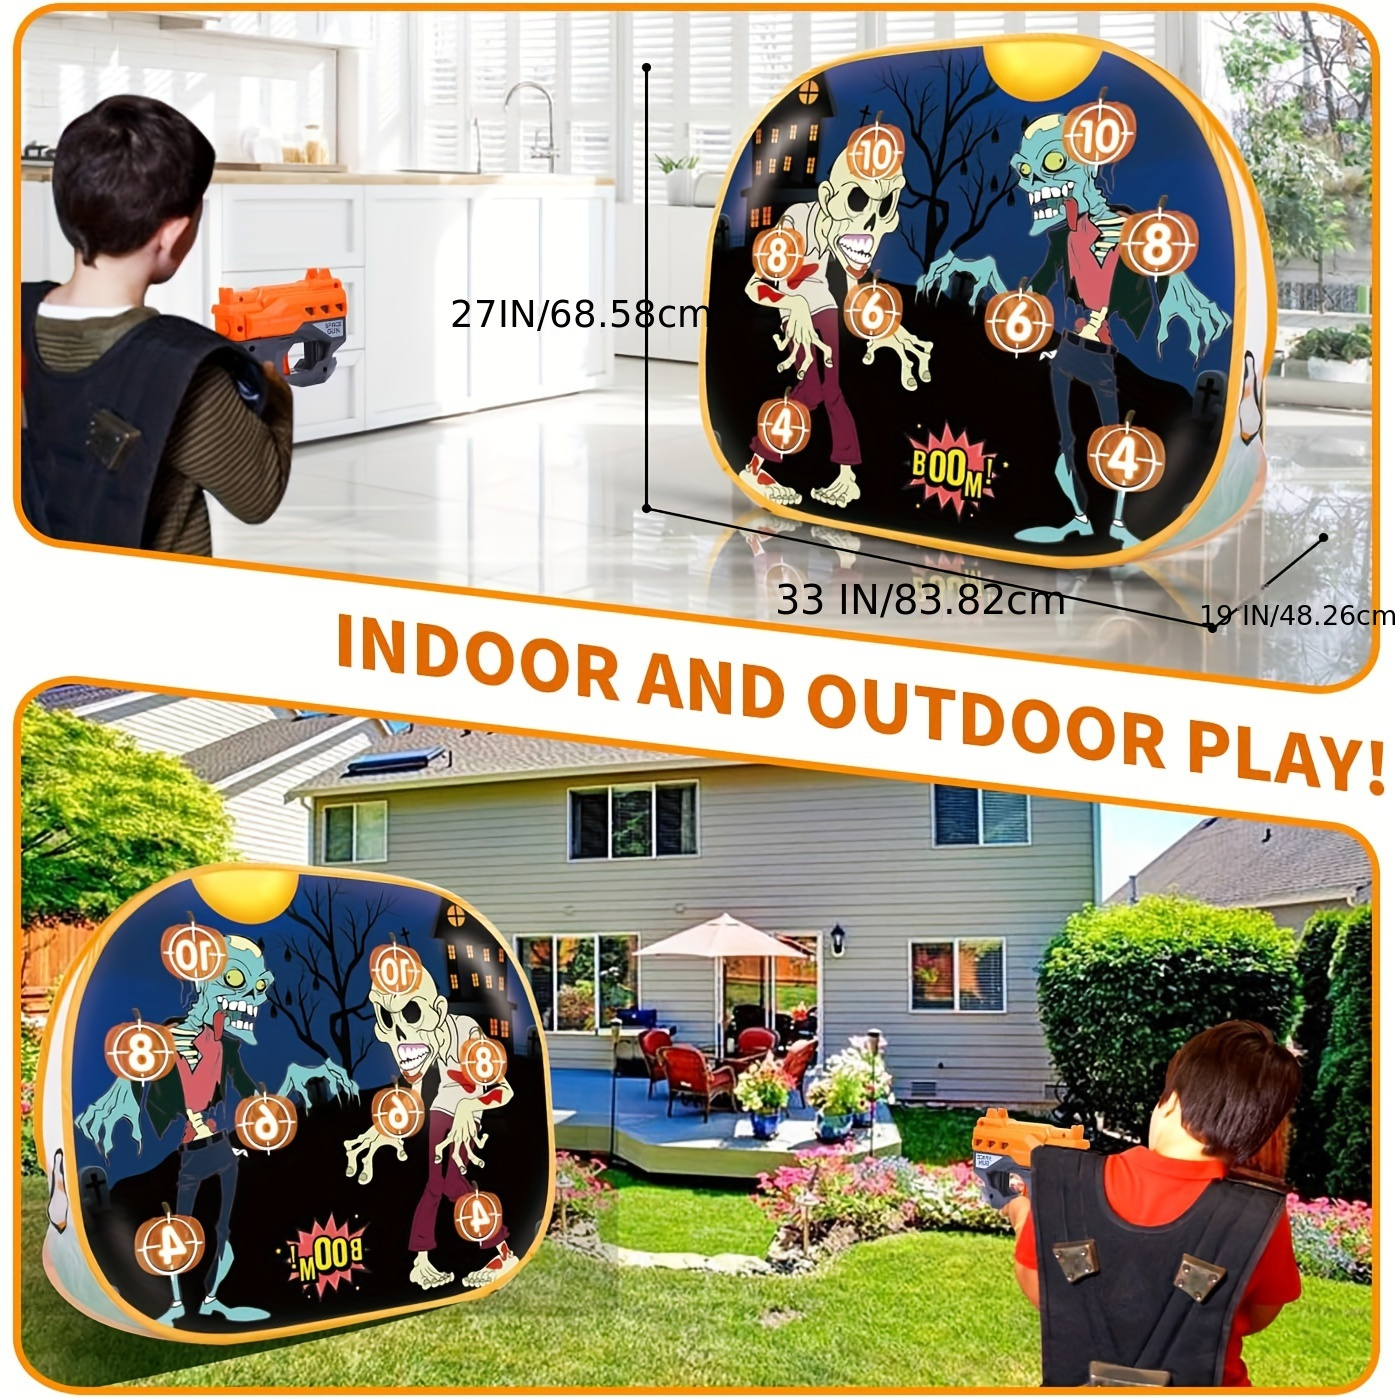 

Target With Toy Gun, Zombie Shooting Toy Kids Shooting Disc With Net And Toy Weapons, Outdoor Toy Garden Toy For Boys Girls